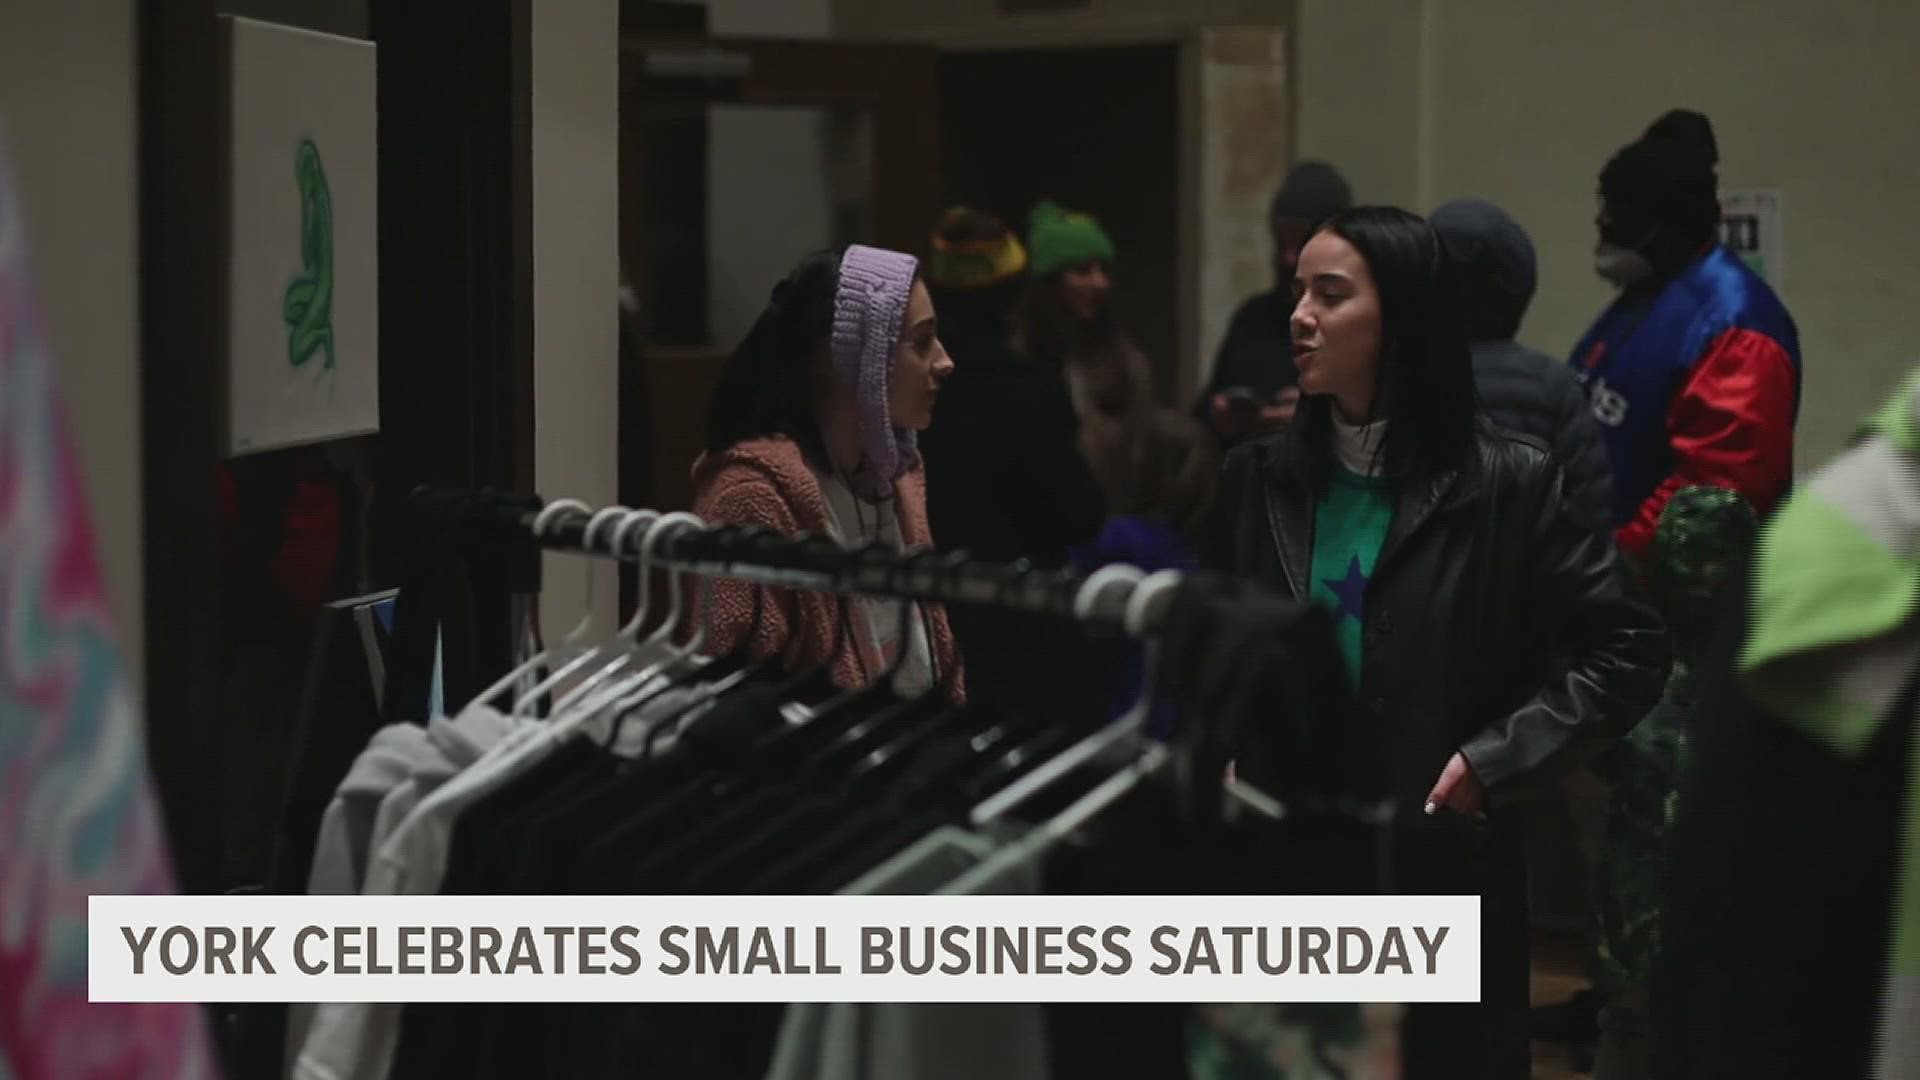 Local store and restaurant owners say they are encouraged by the influx of people coming into their business for Small Business Saturday.